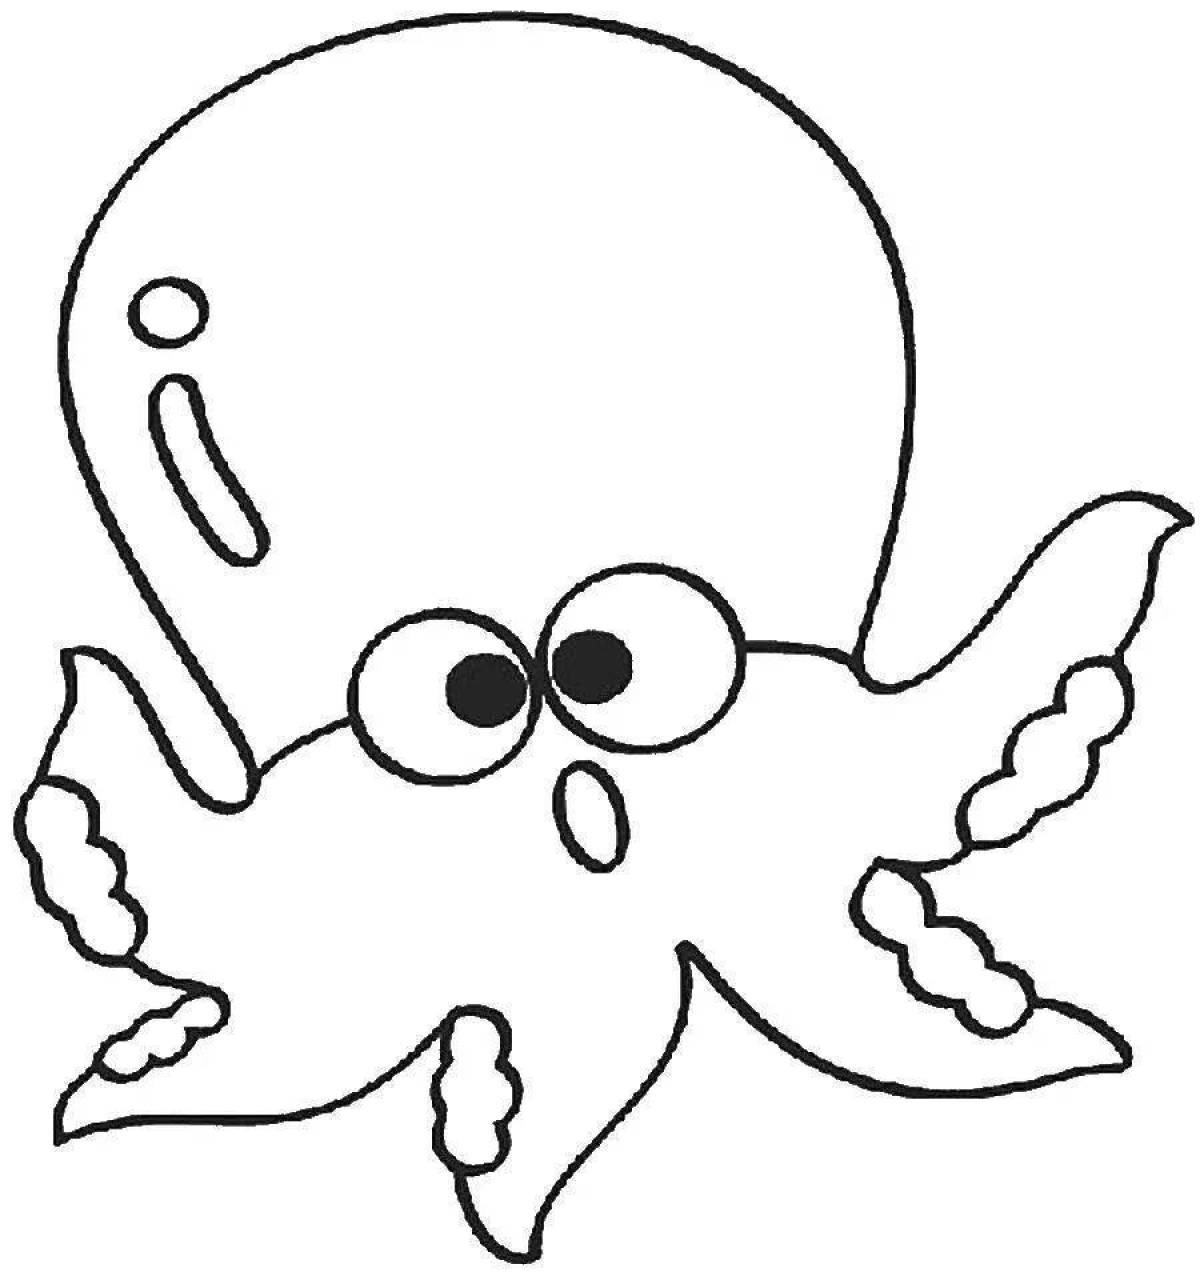 Adorable octopus coloring book for babies